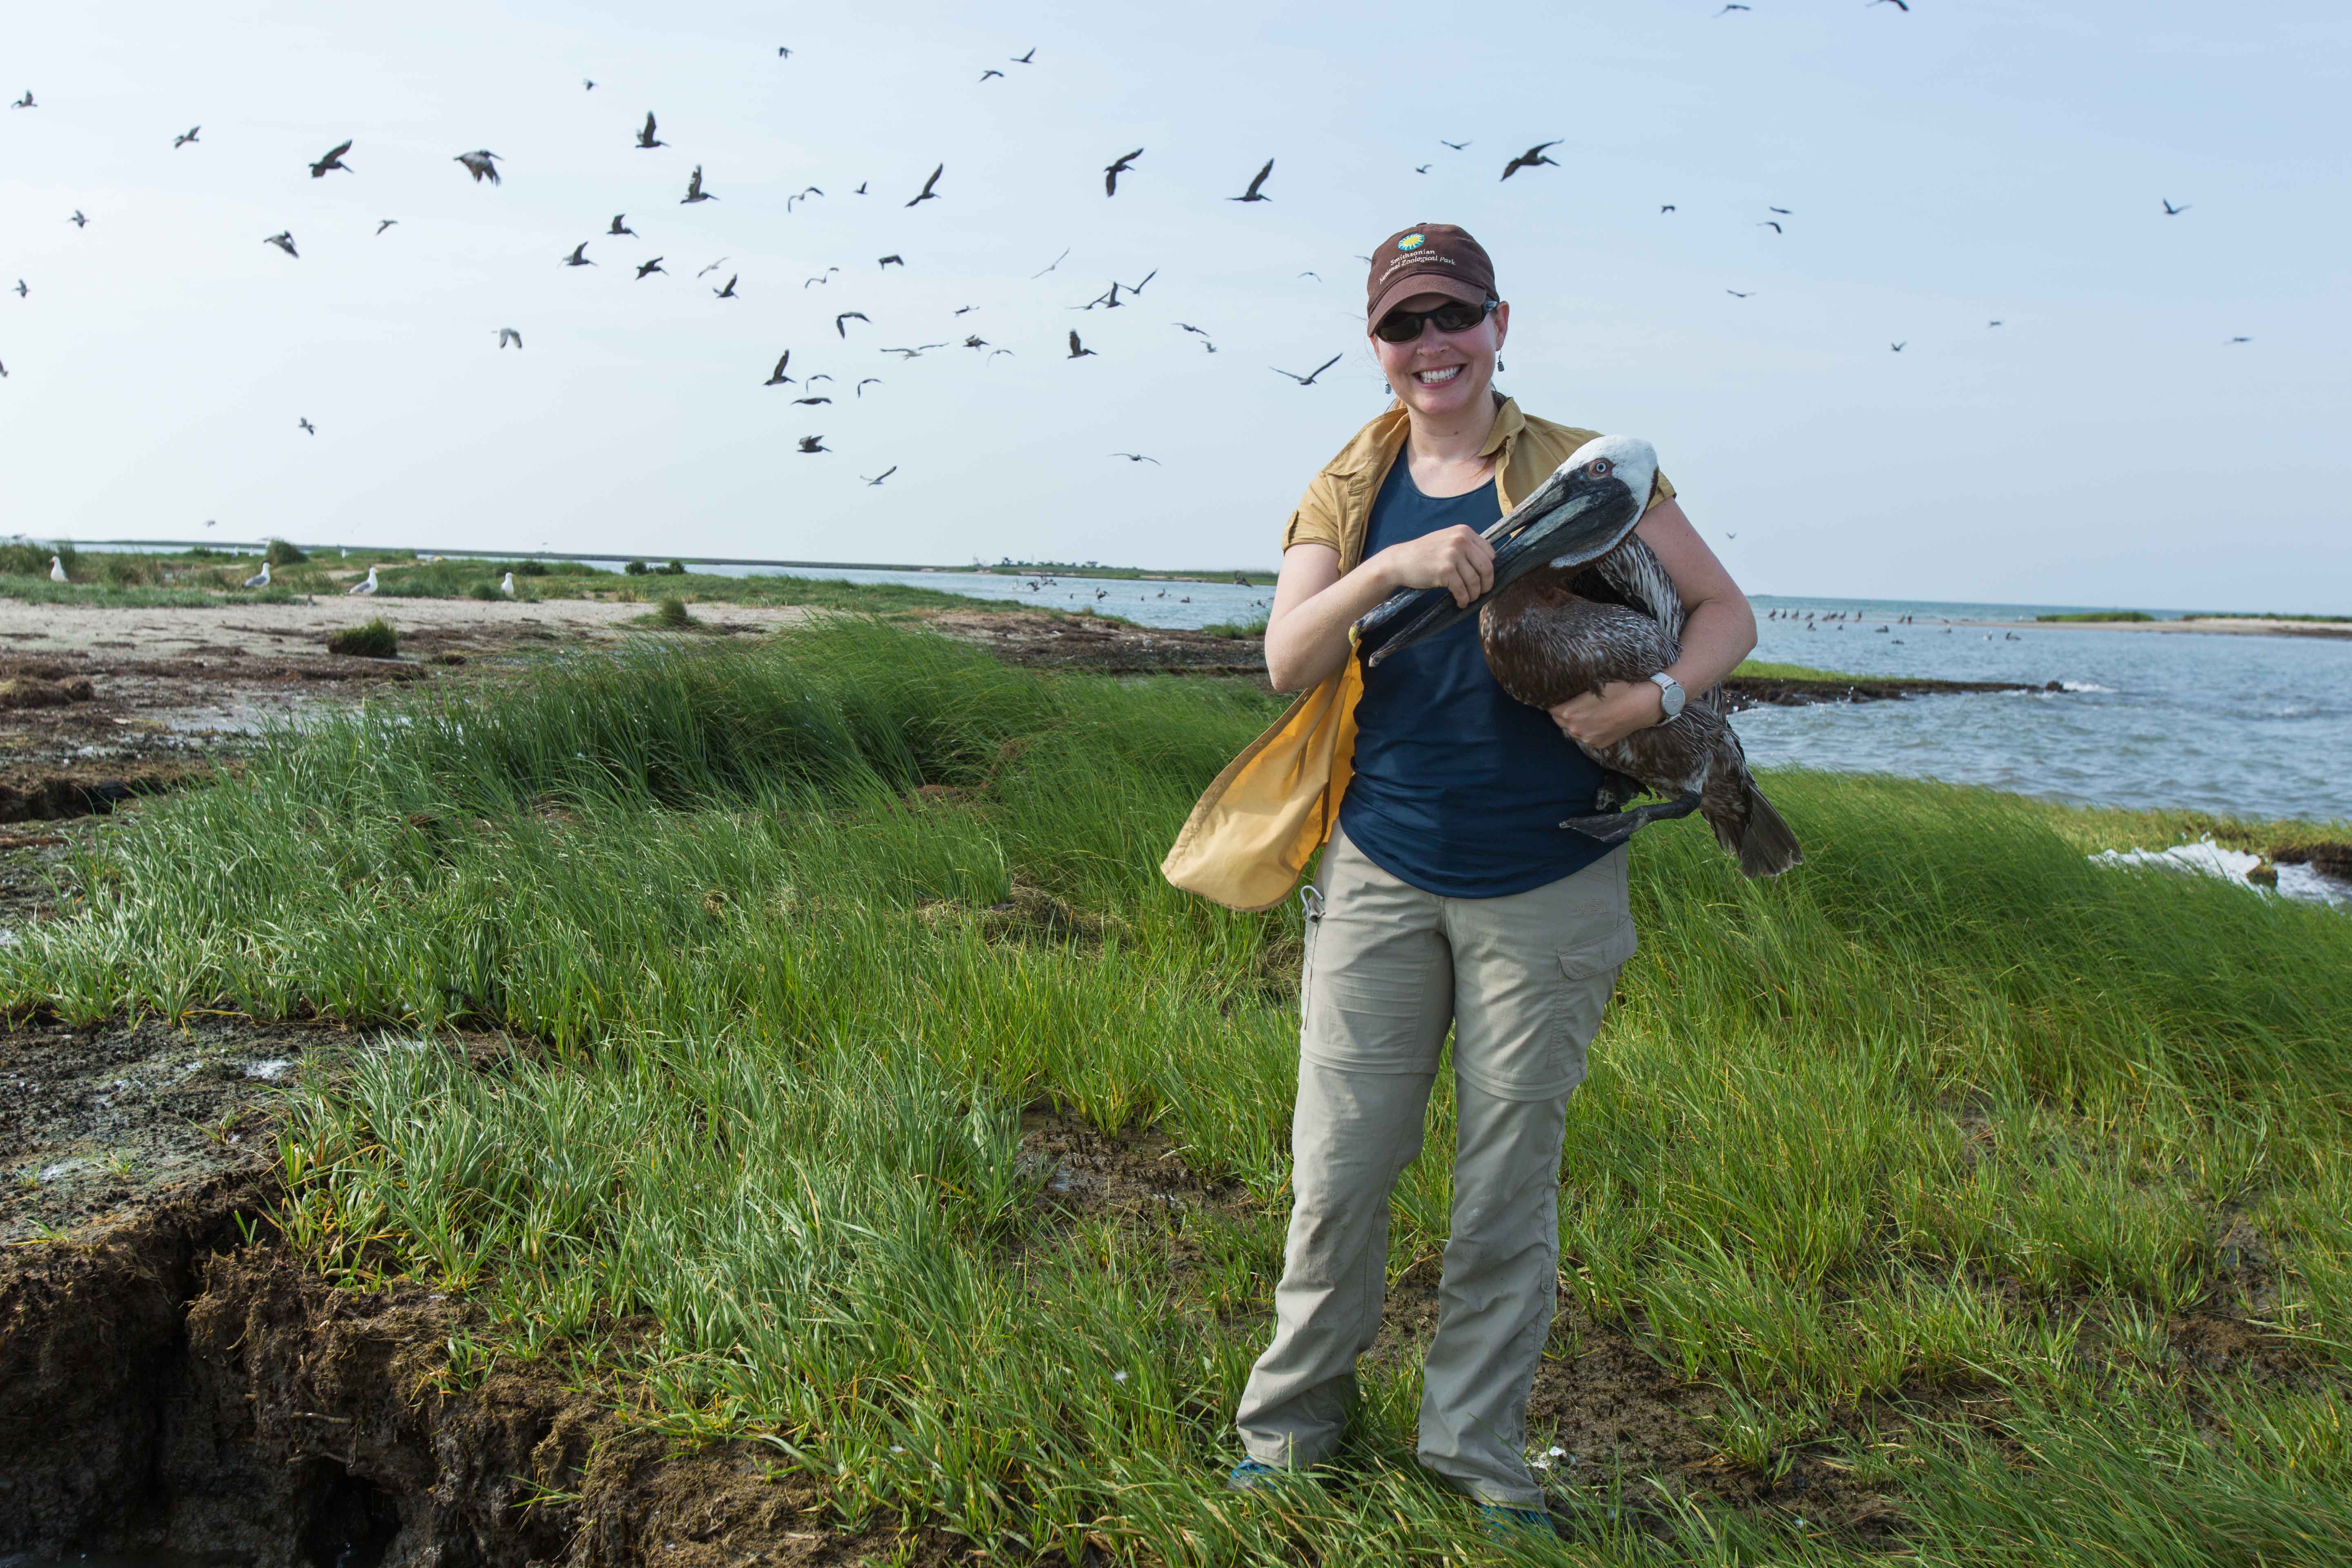 A researcher holding a brown pelican on an island with sand, grasses and pelicans flying overhead